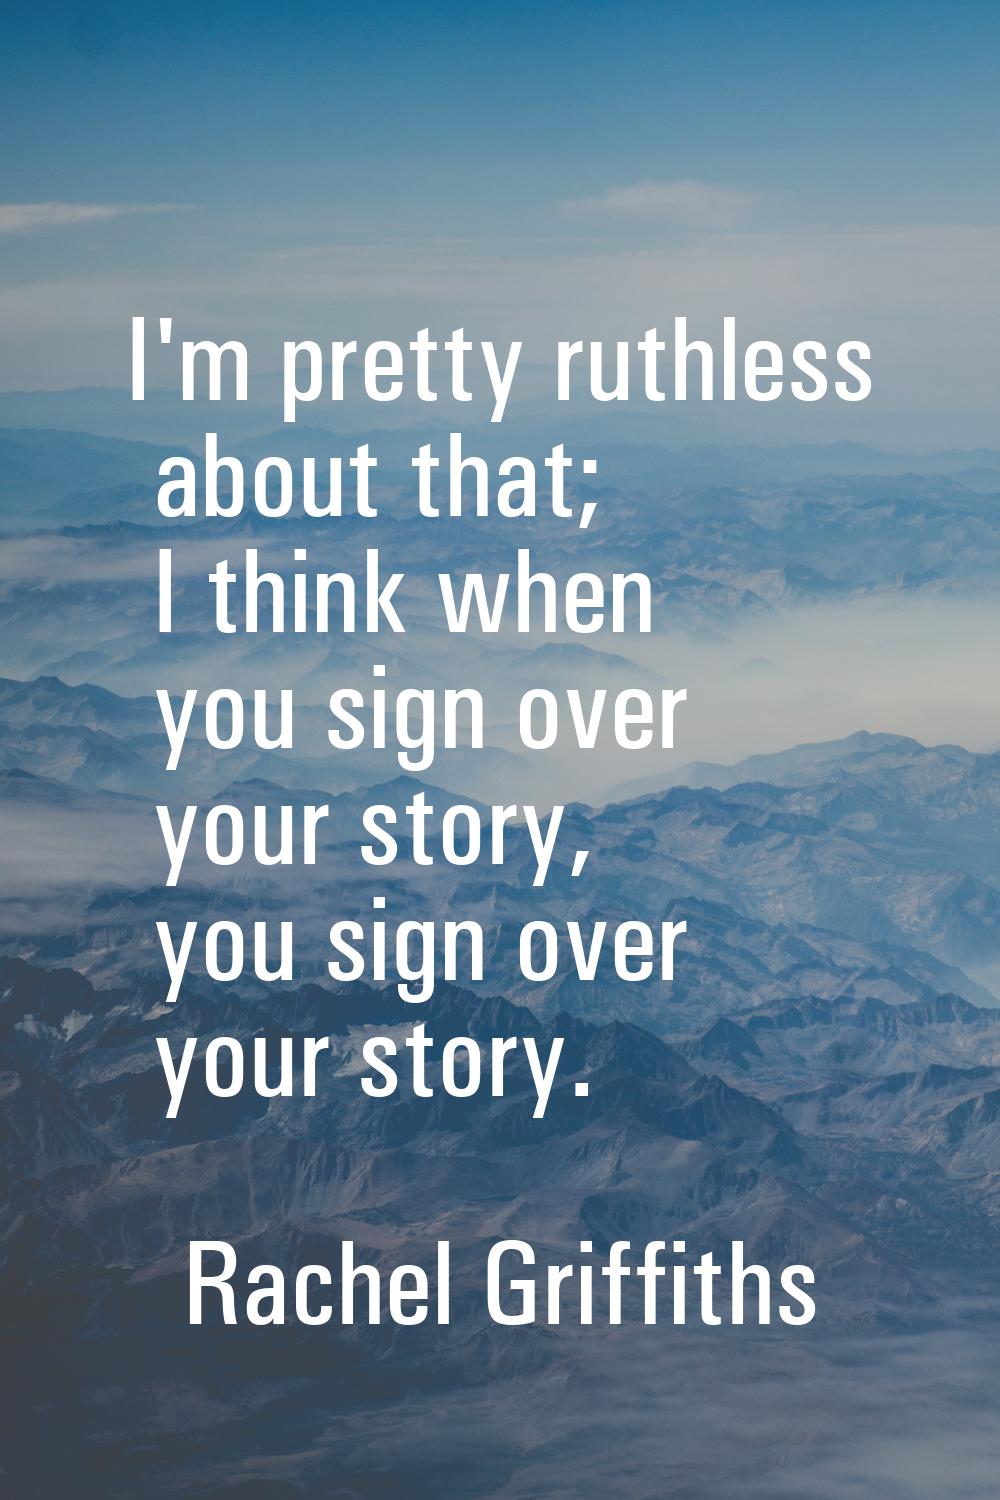 I'm pretty ruthless about that; I think when you sign over your story, you sign over your story.